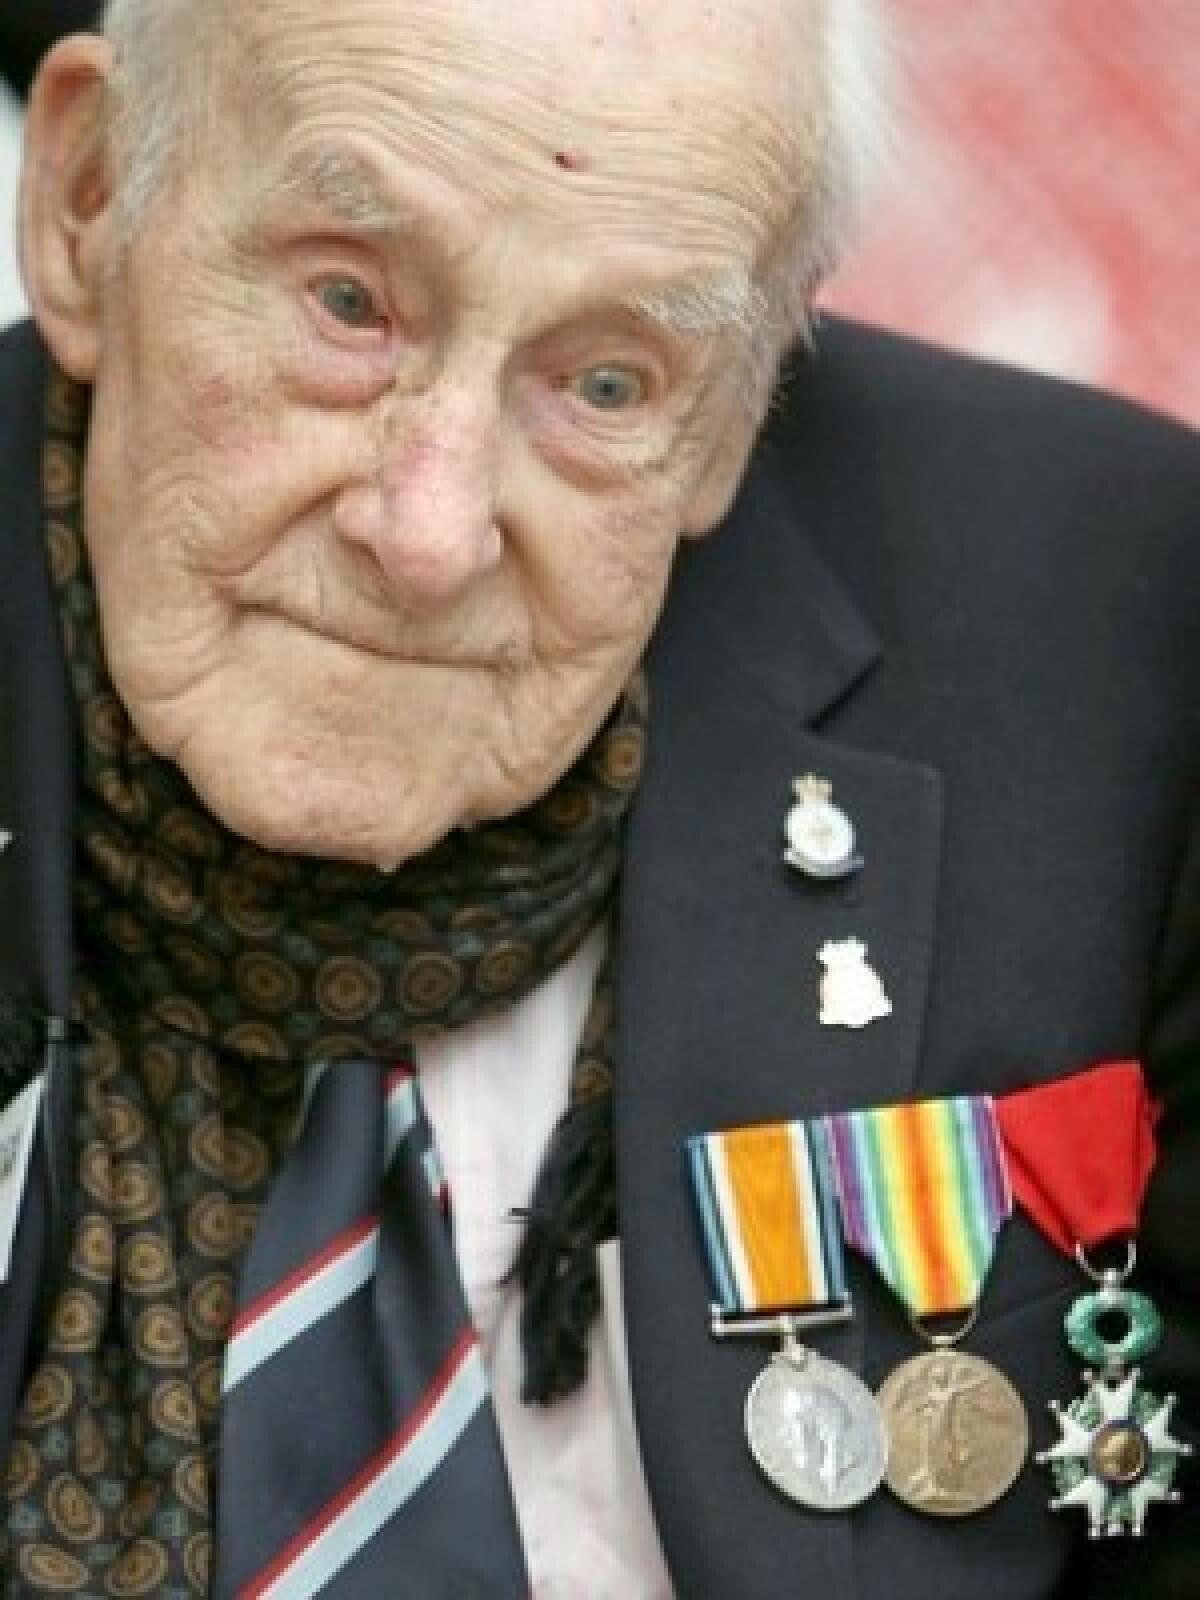 Henry Allingham was the last surviving original member of the RAF. He spoke often of the sacrifices of the wars fallen.